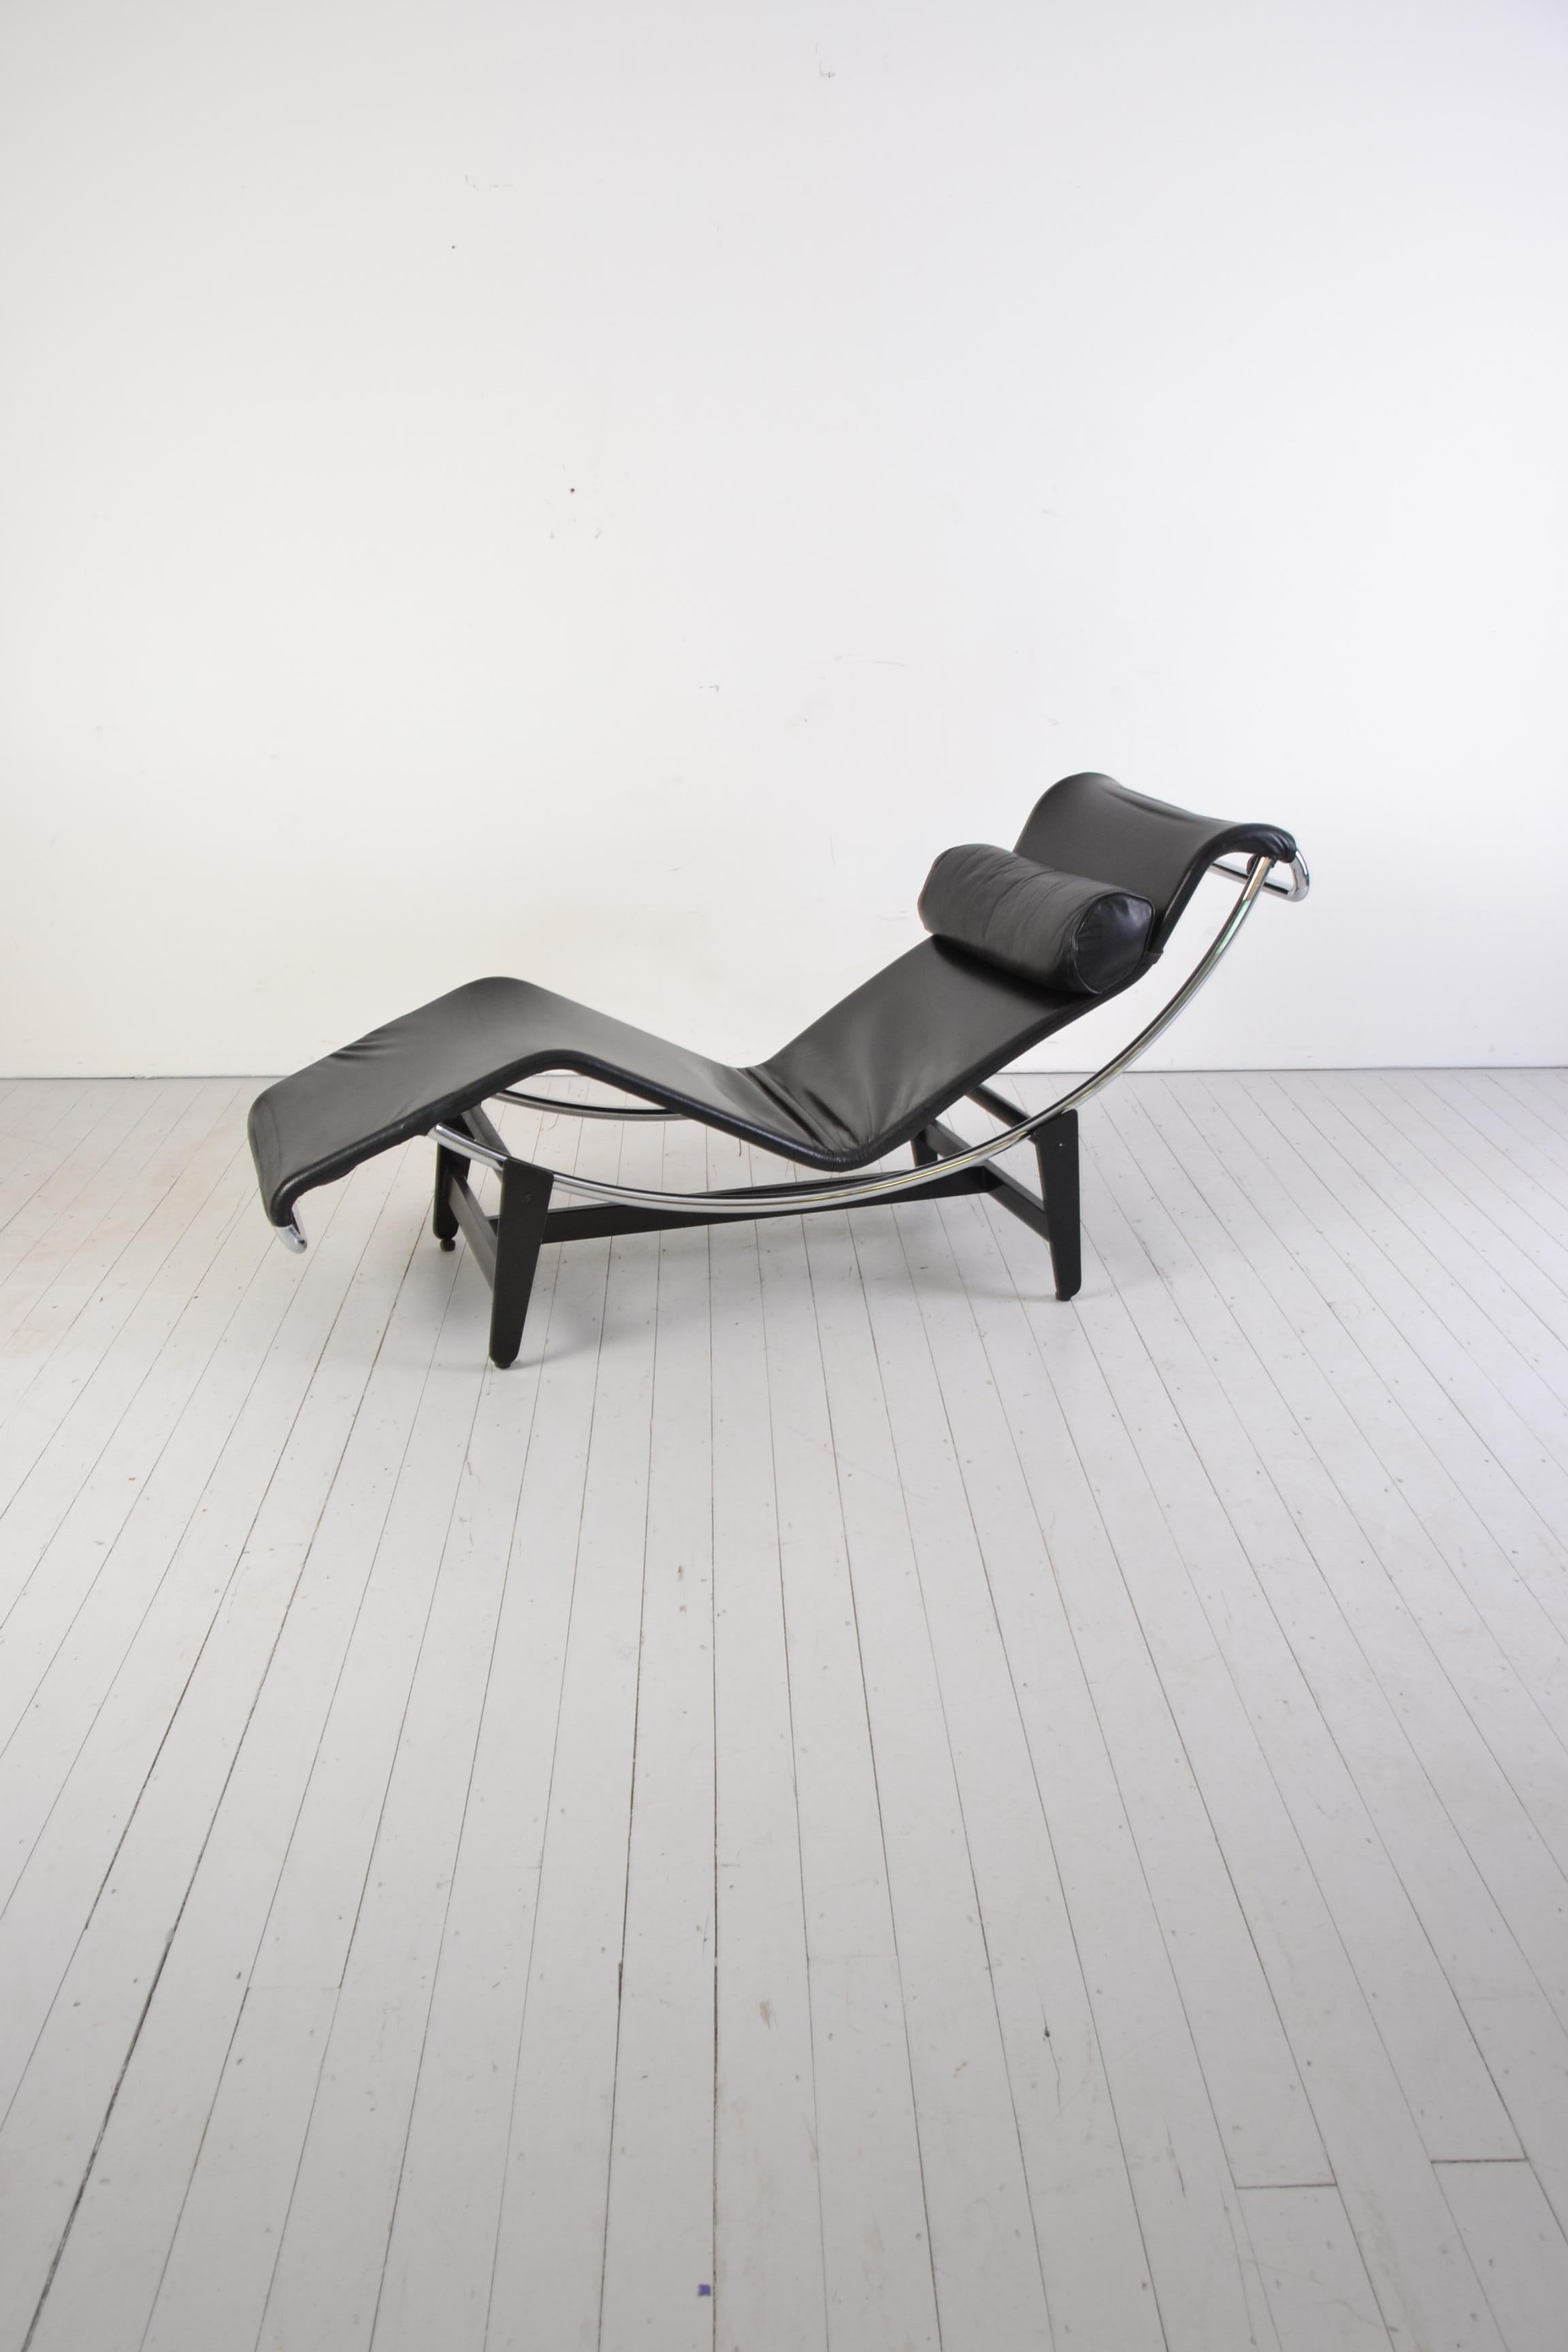 A very rare LC4 / B306 liege by Le Corbusier, Pierre Jeanneret and Charlotte Perriand. 

Sigfried Giedion, Werner Max Moser and Rudolf Graber, the founders of WOBAG (later Wohnbedarf) started selling original LC4 chaise longue’s already in the